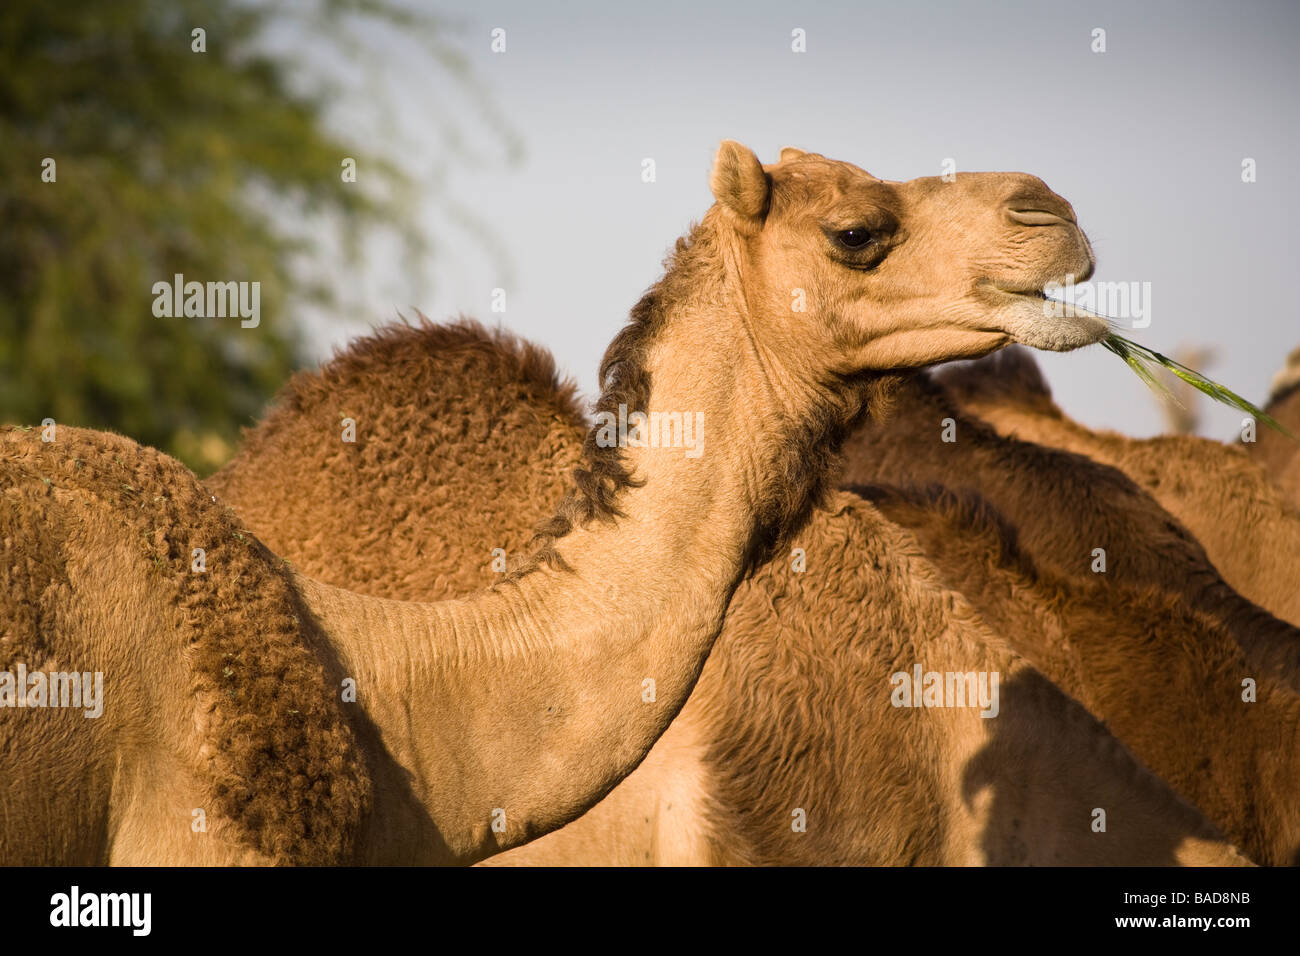 Camels at the National Camel Research Centre, Jorbeer, Bikaner, Rajasthan, India Stock Photo